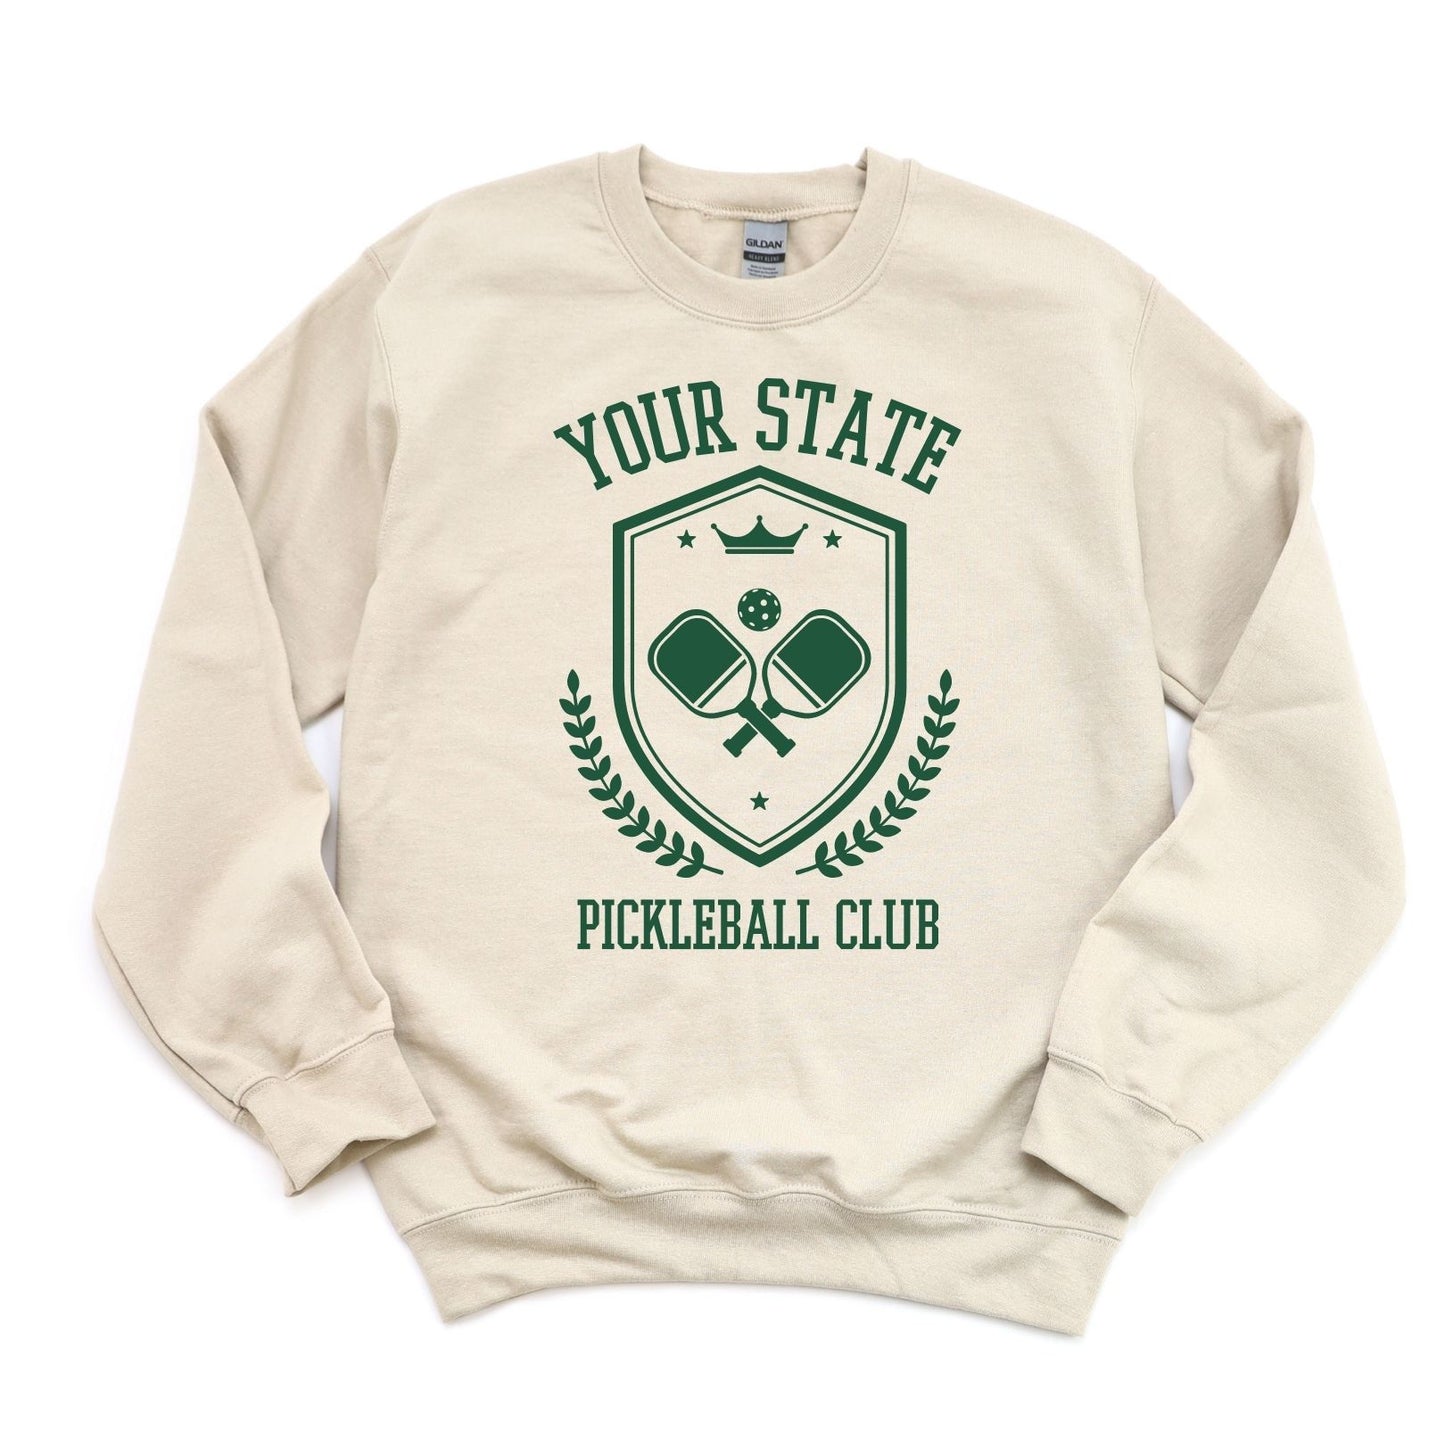 Pickleball Club Sweatshirt - Customize With Your State or City or Brand Name